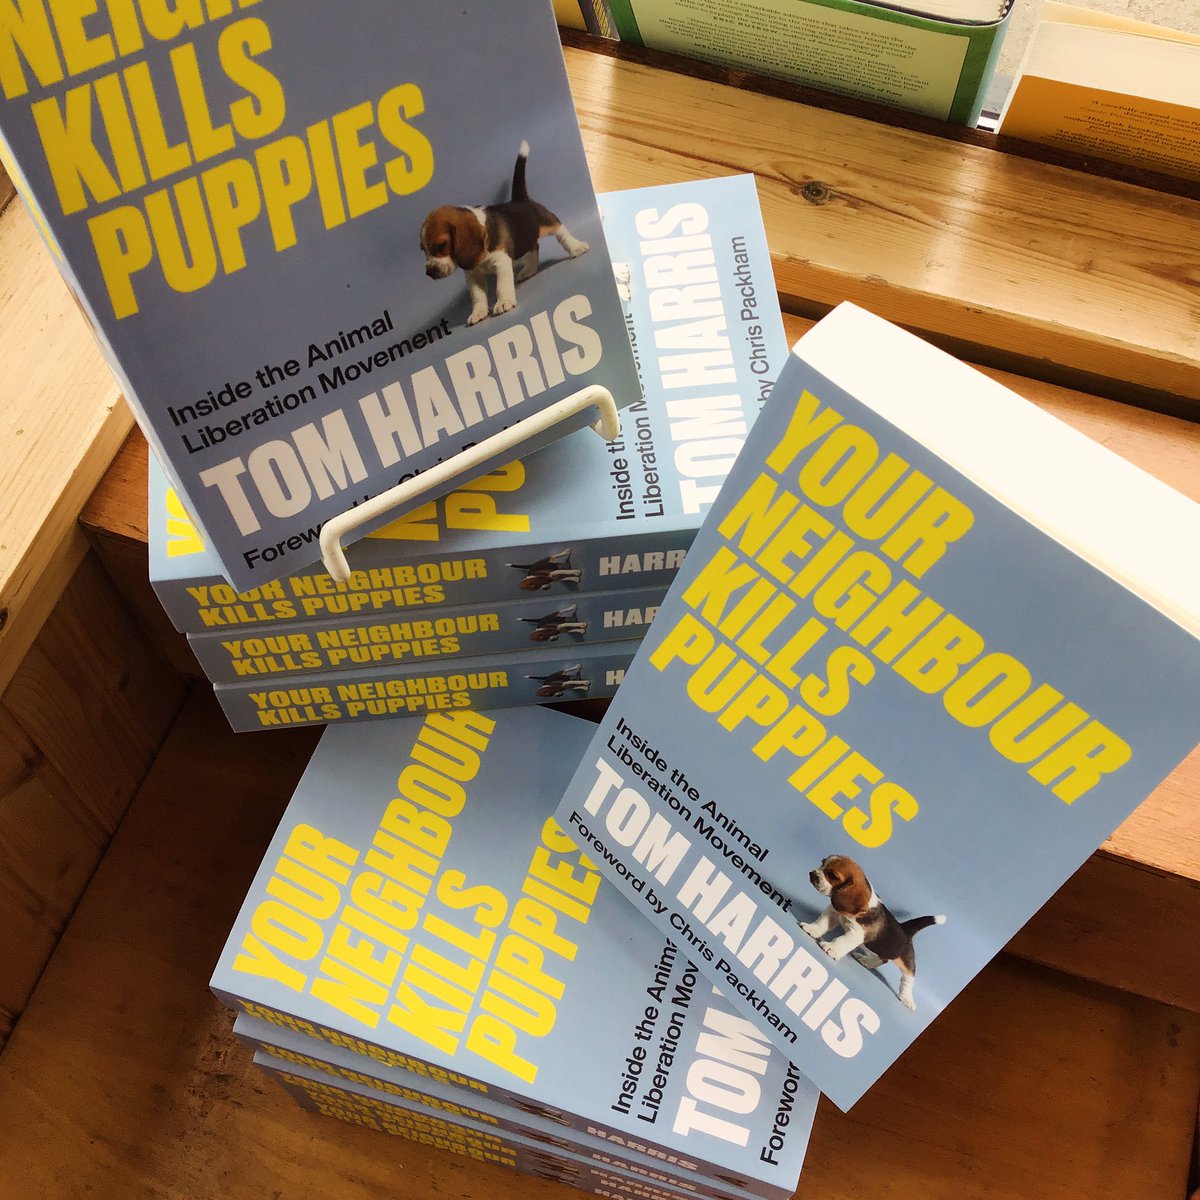 This new book on the Stop Huntingdon Animal Cruelty campaign drops today! Check it out: burningbooks.com/products/your-…